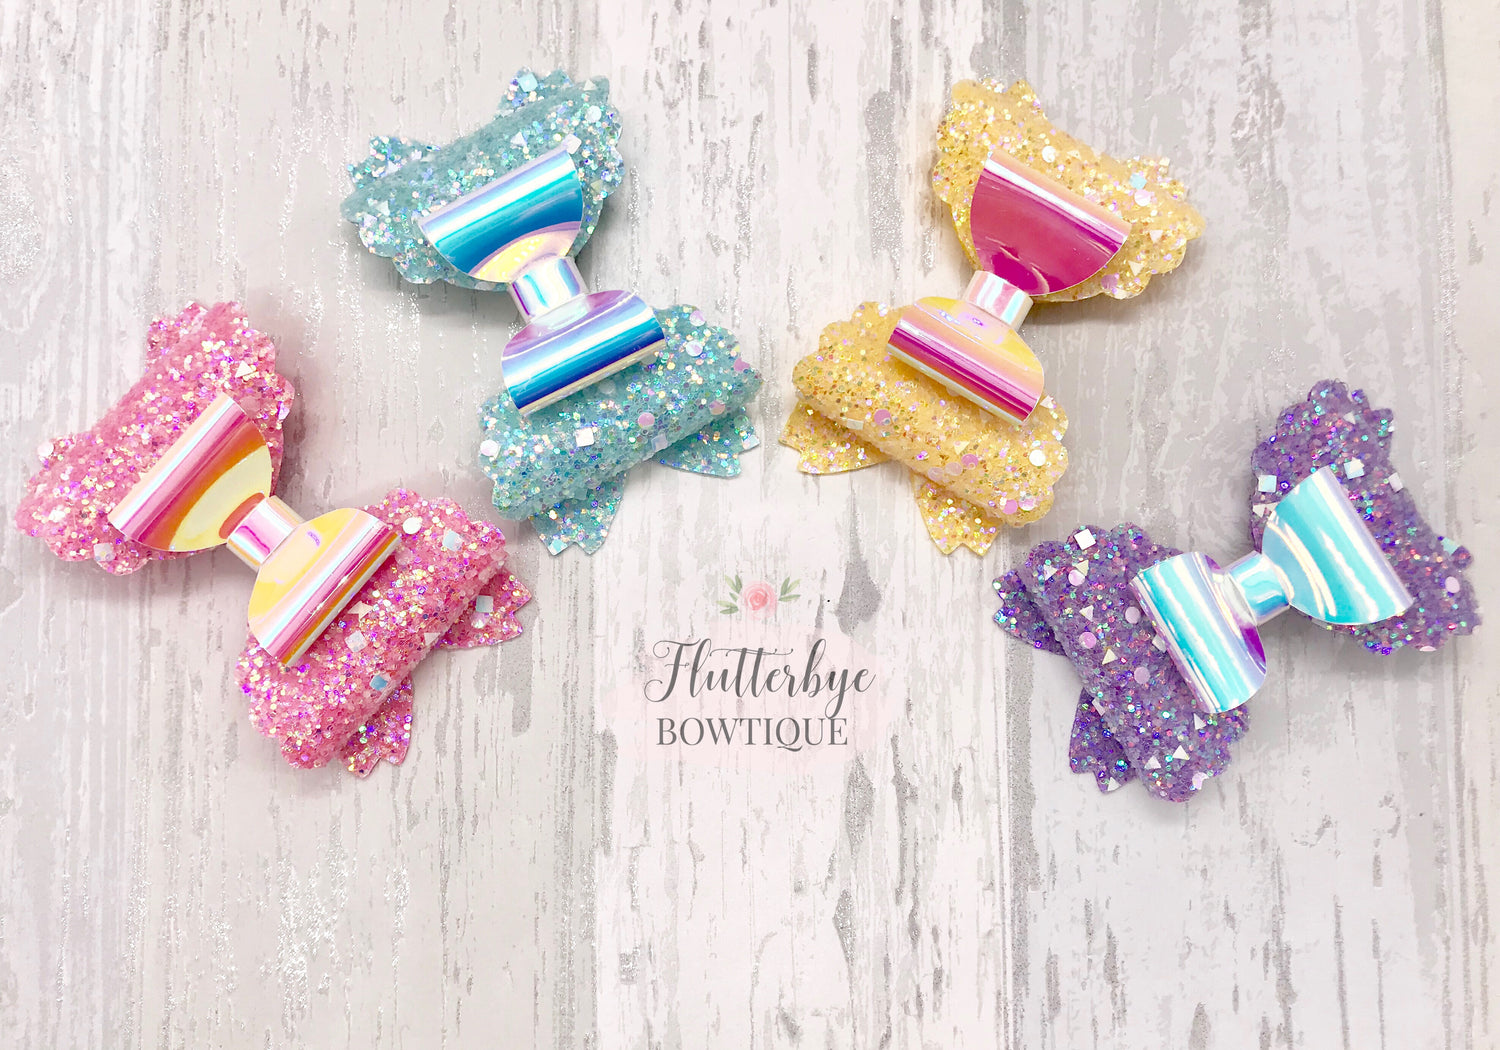 Iridescent Glitter and Mirror Scalloped Double Bow - Flutterbye Bowtique